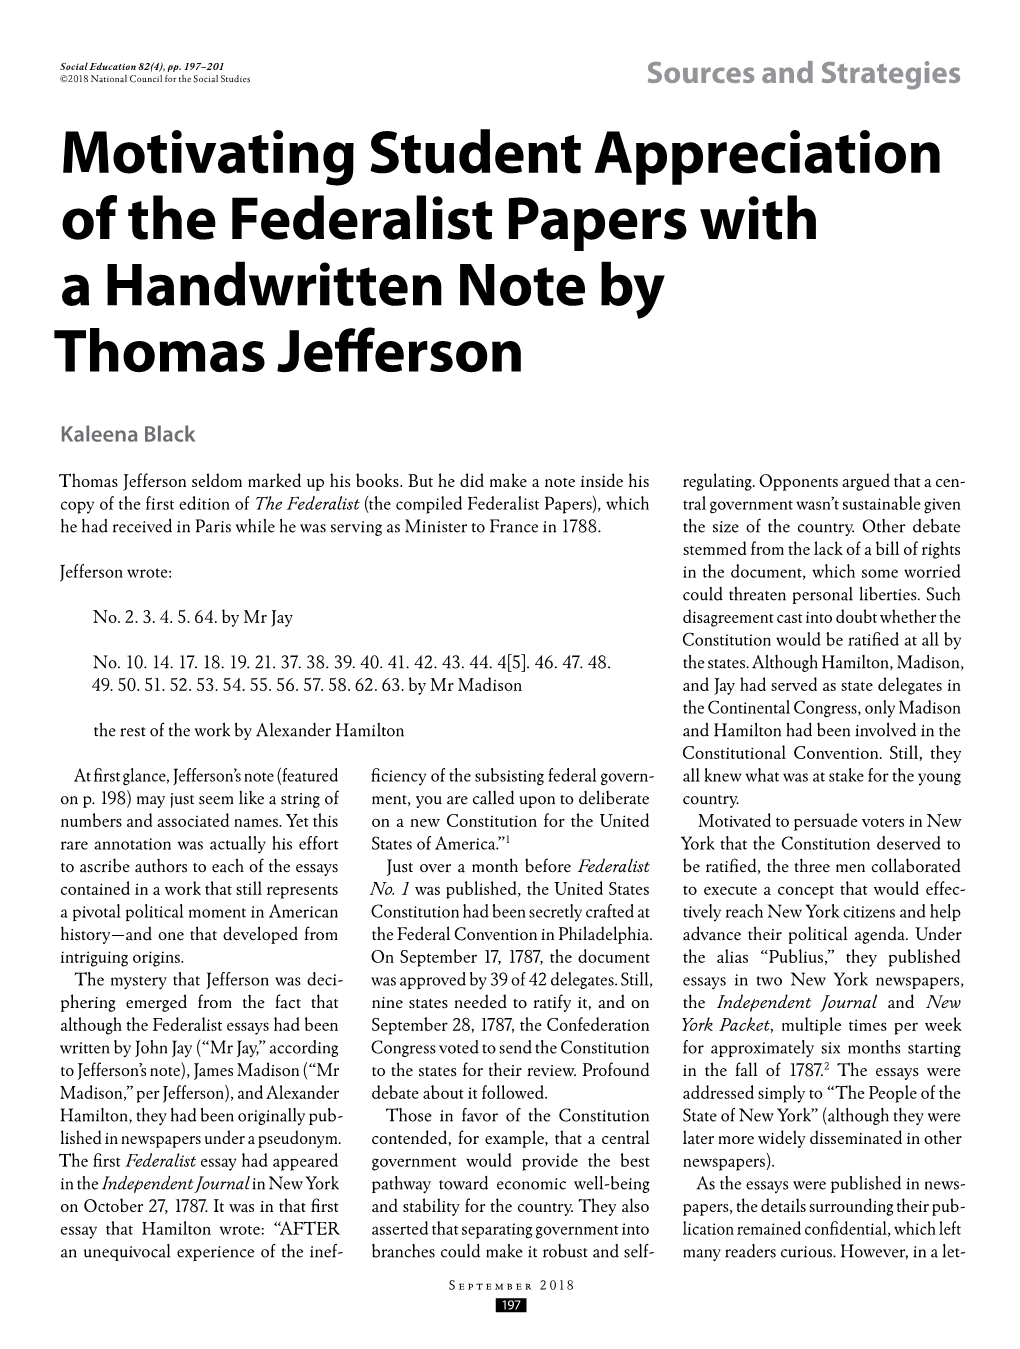 Motivating Student Appreciation of the Federalist Papers with a Handwritten Note by Thomas Jefferson